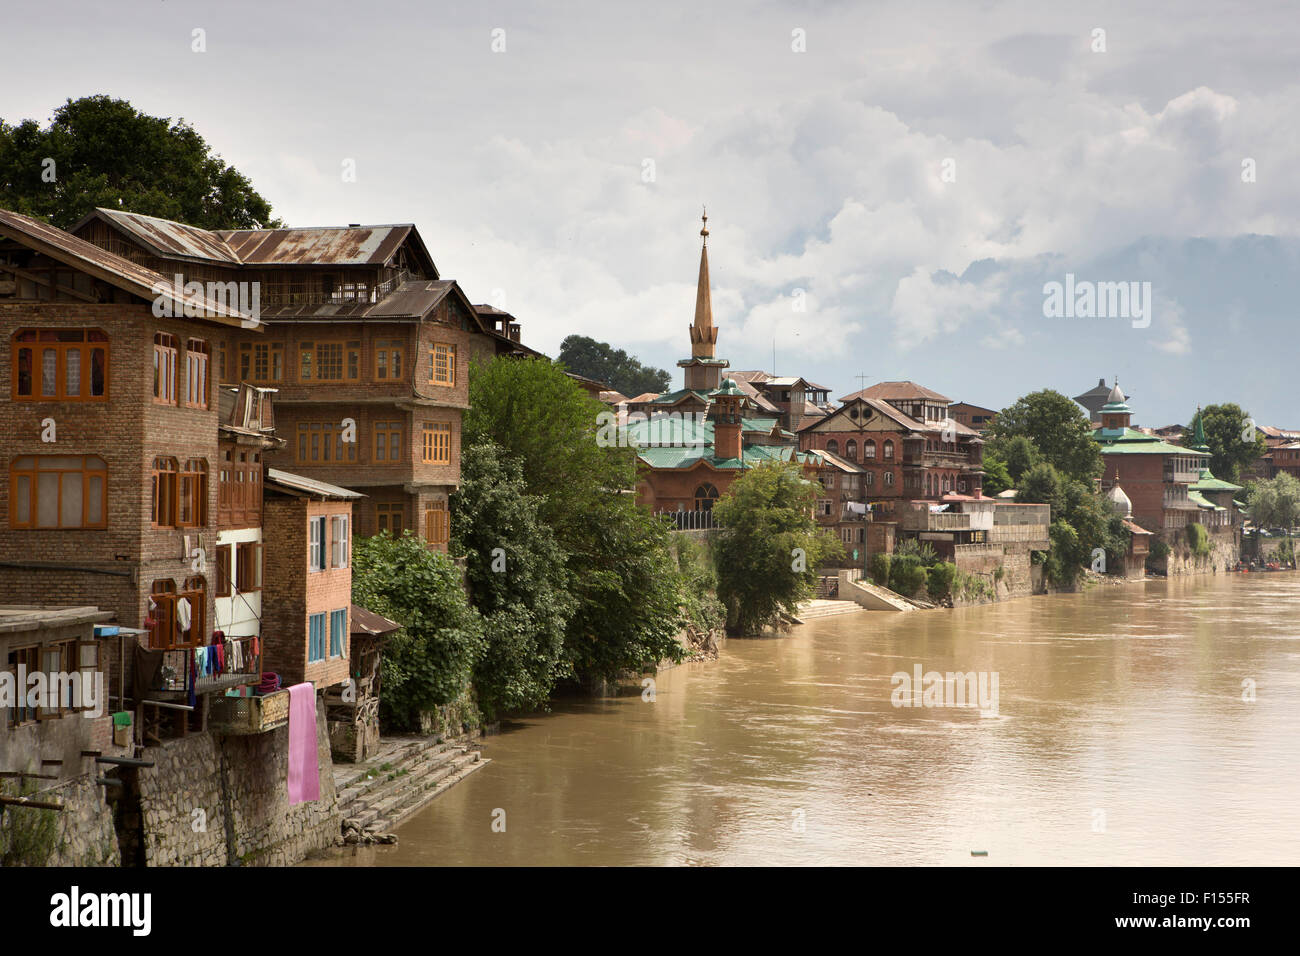 India, Jammu & Kashmir, Srinagar, Old City, houses, mosques and temples on banks of River Jhelum Stock Photo